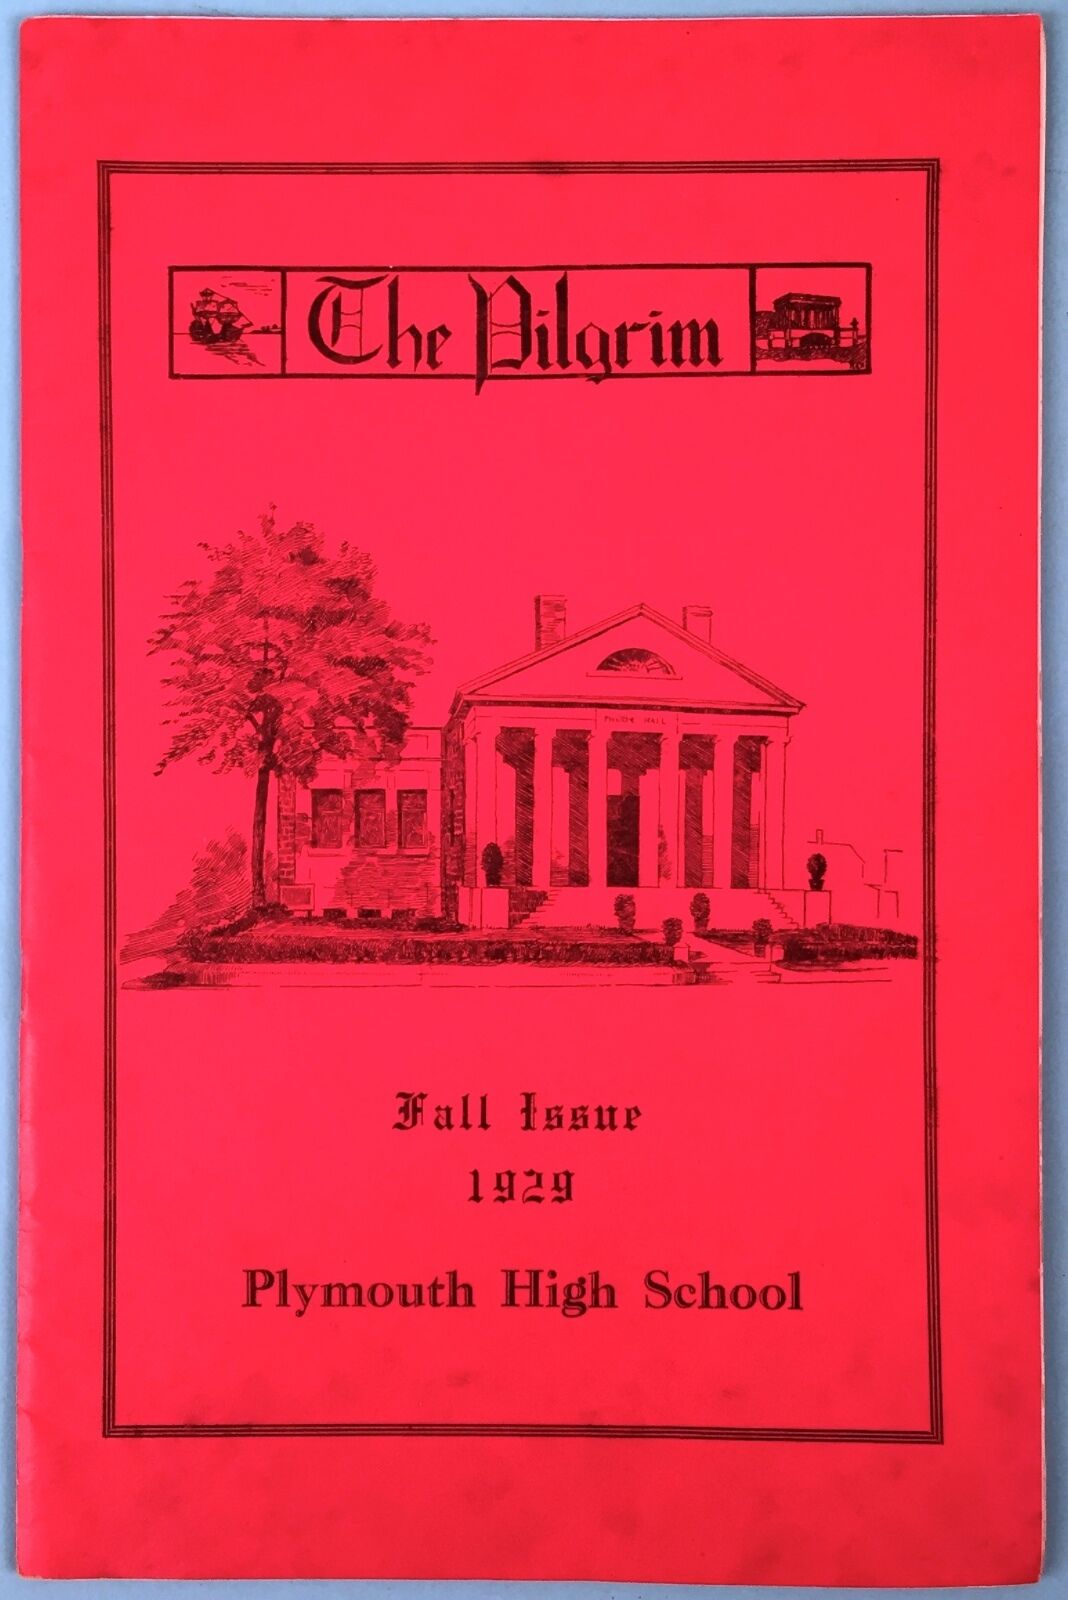 1929 Plymouth High School Quarterly~Fall Issue, Plymouth, Massachusetts